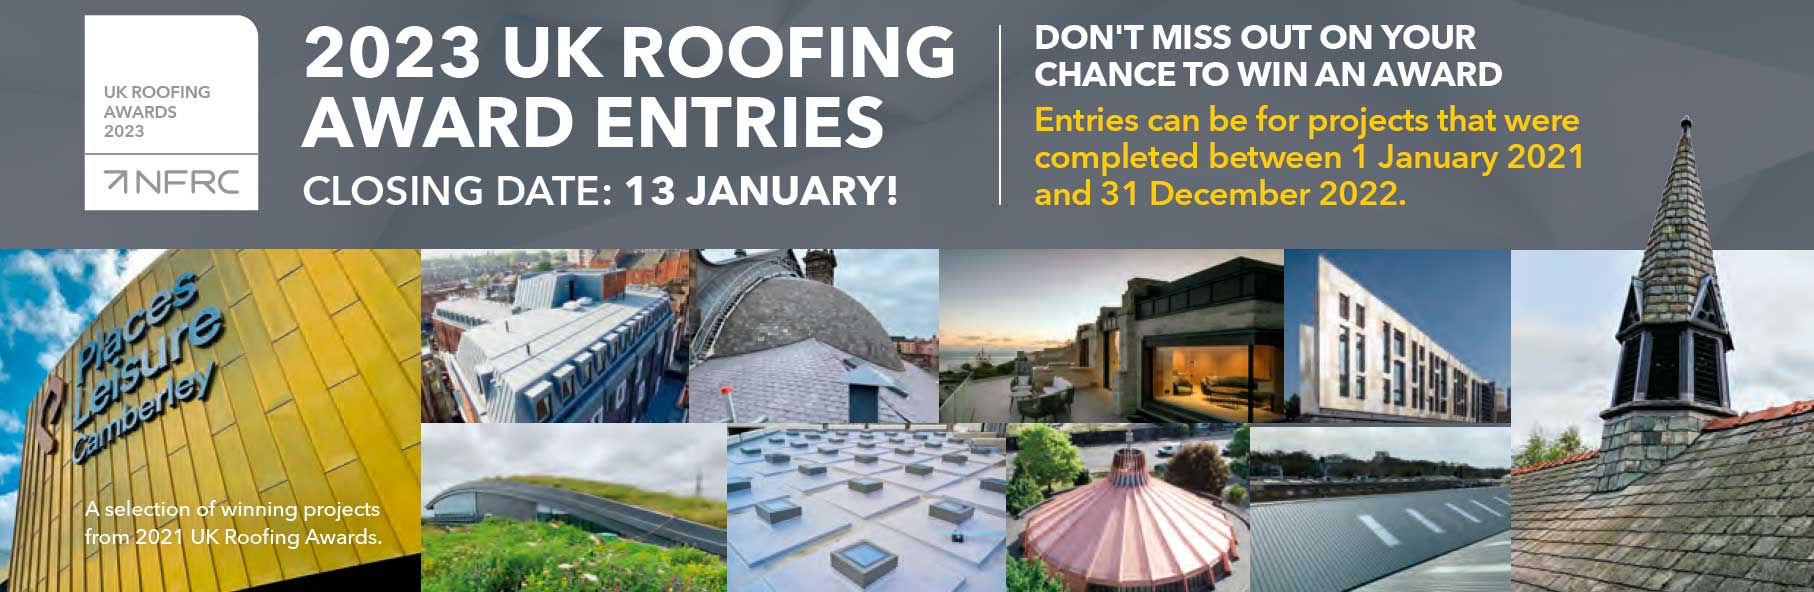 Enter now for a chance to win a 2023 UK Roofing Award